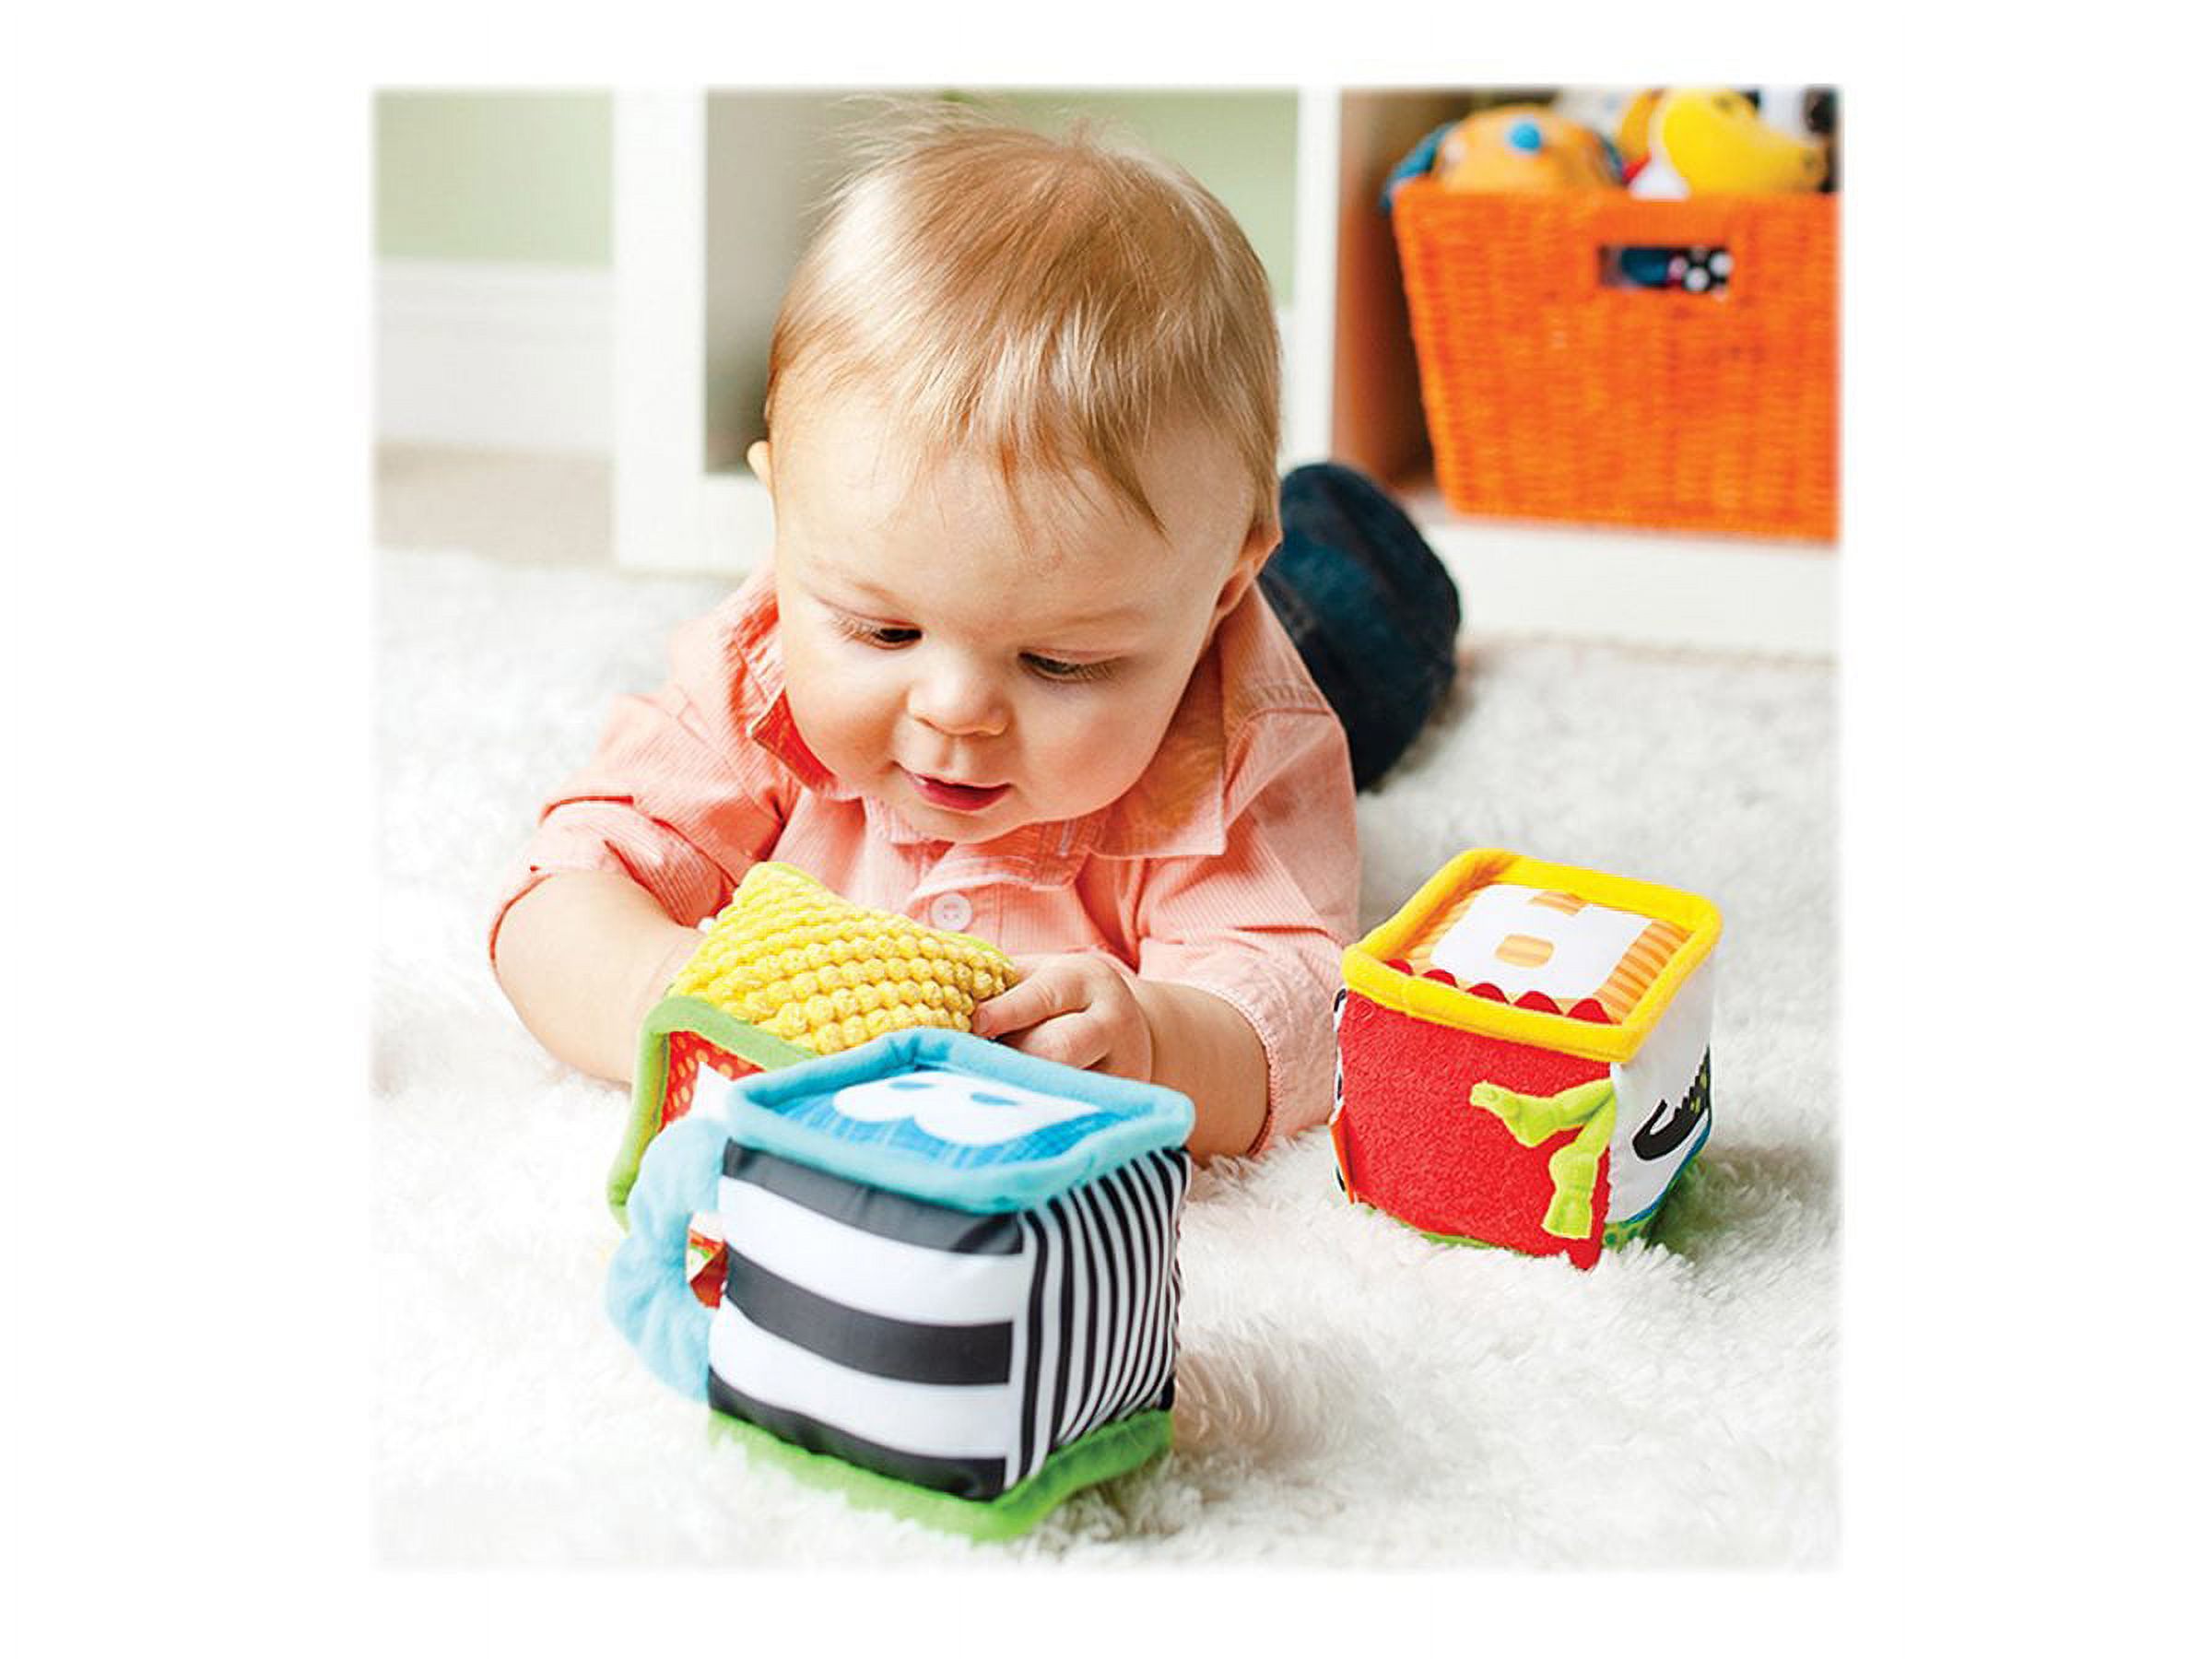 Infantino Discover and Play Soft Blocks Development Toy - image 3 of 3